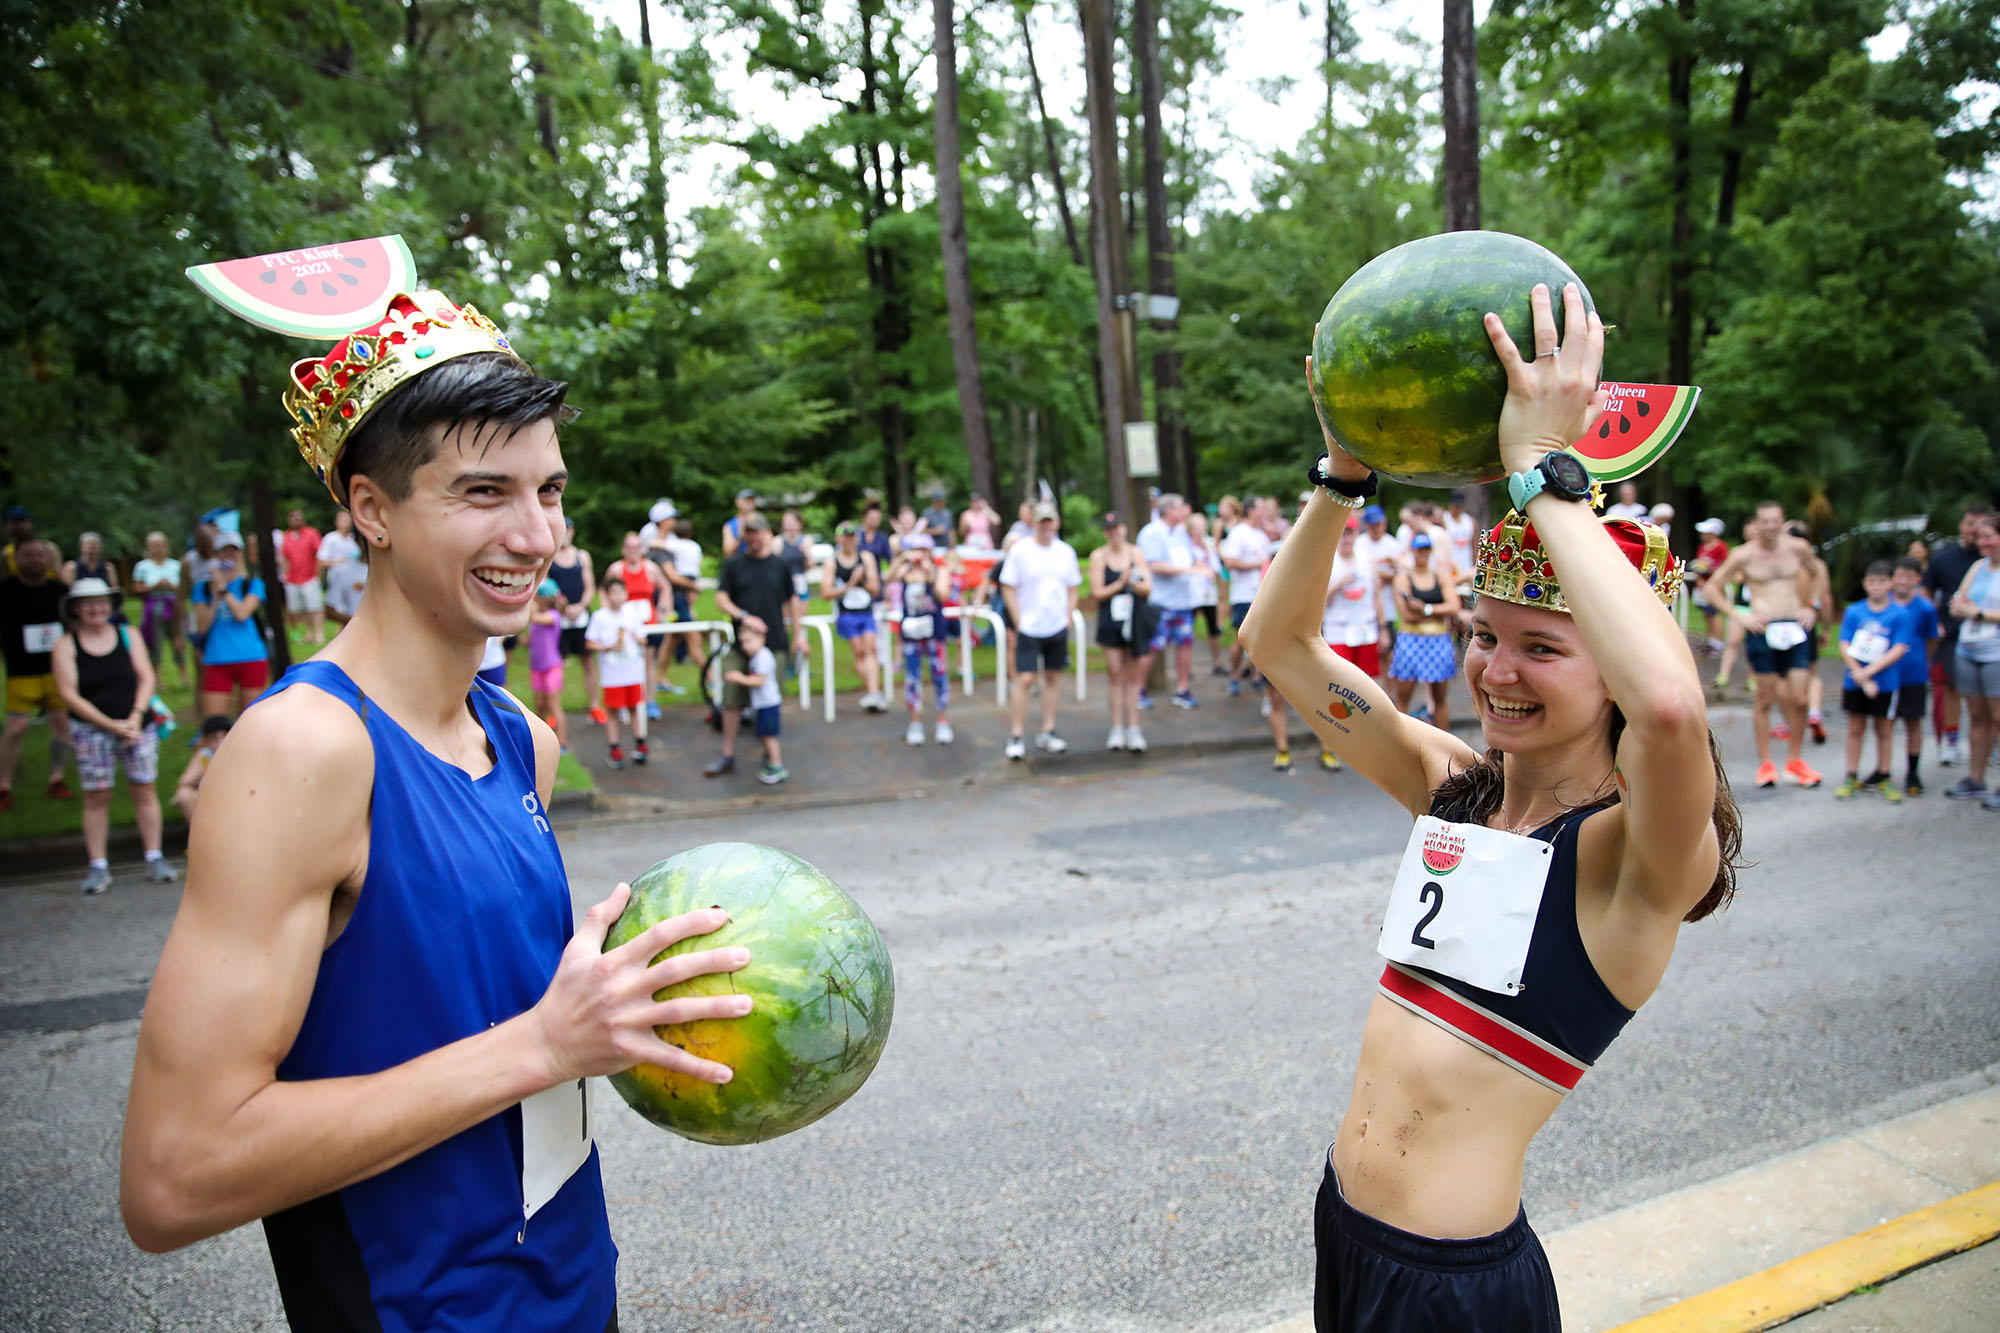 Images from the 2021 Jack Gamble Melon Run hosted by the Florida Track Club on Sunday, July 4, 2021 in Gainesville, Fla. (Photos by Matt Stamey)